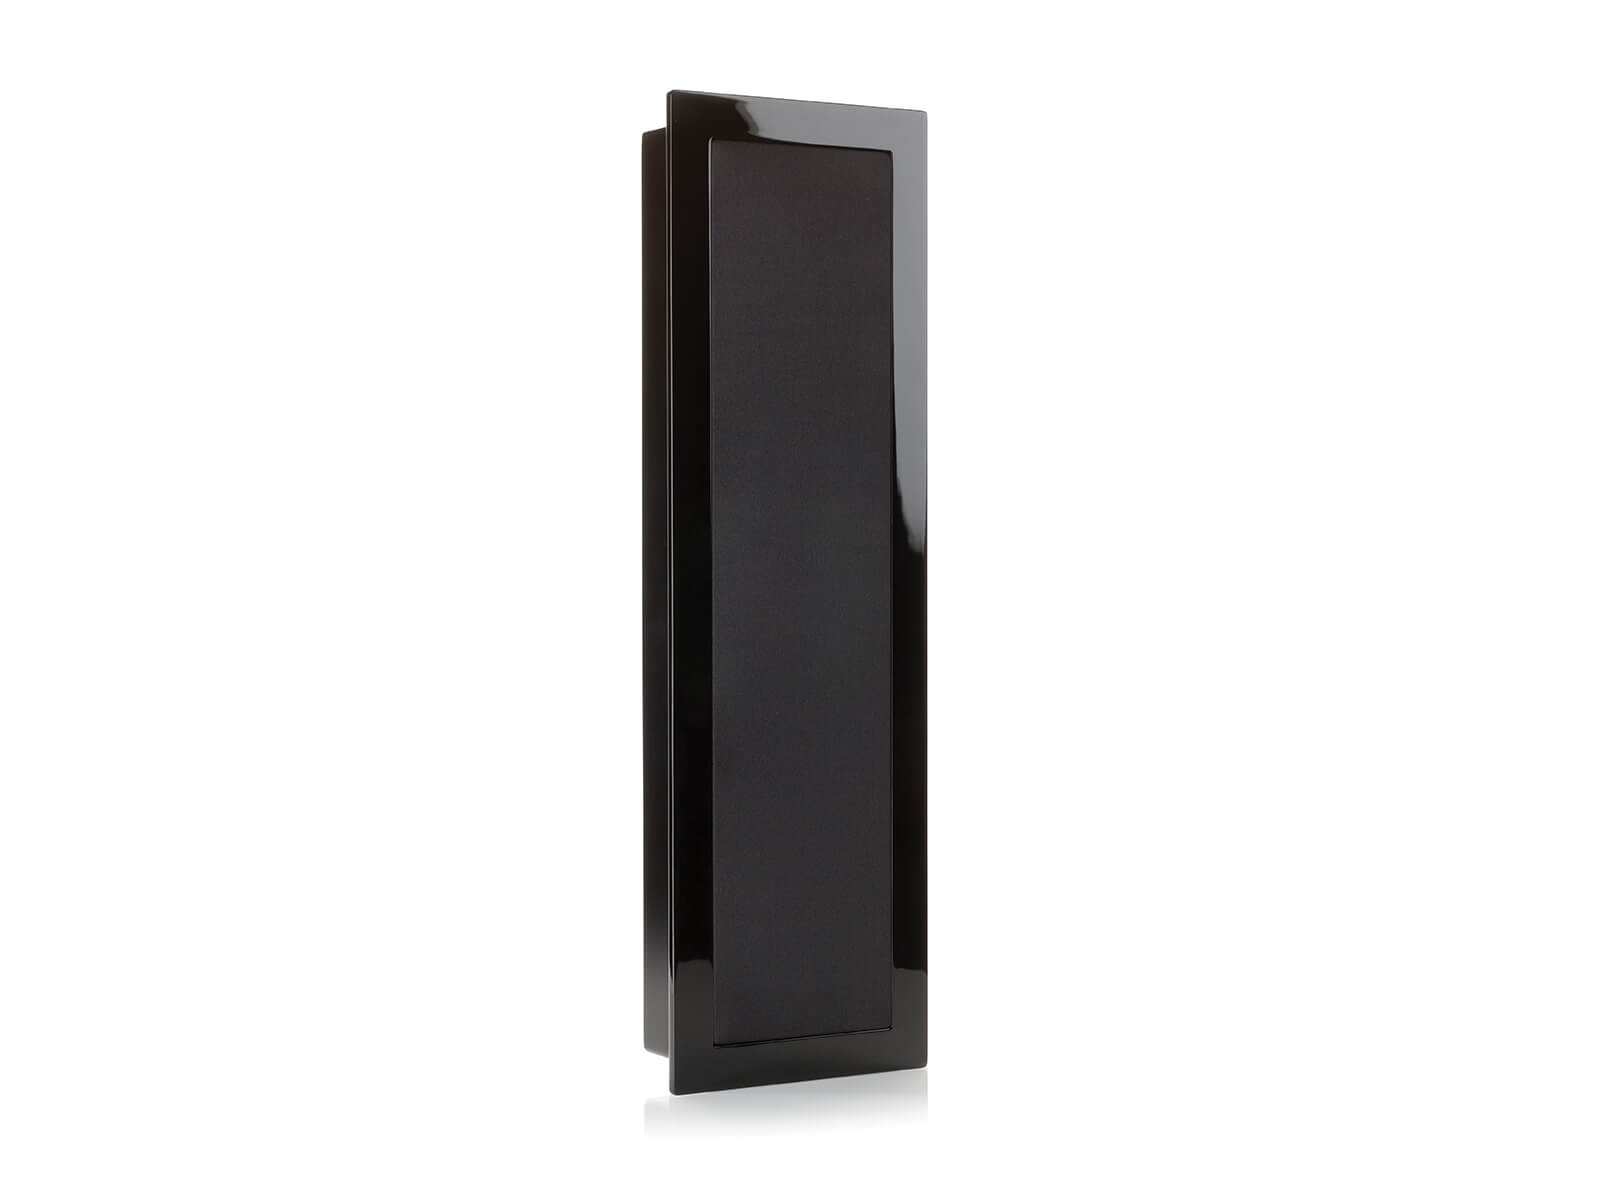 Products Monitor Audio SoundFrame 2 On-Wall Speaker